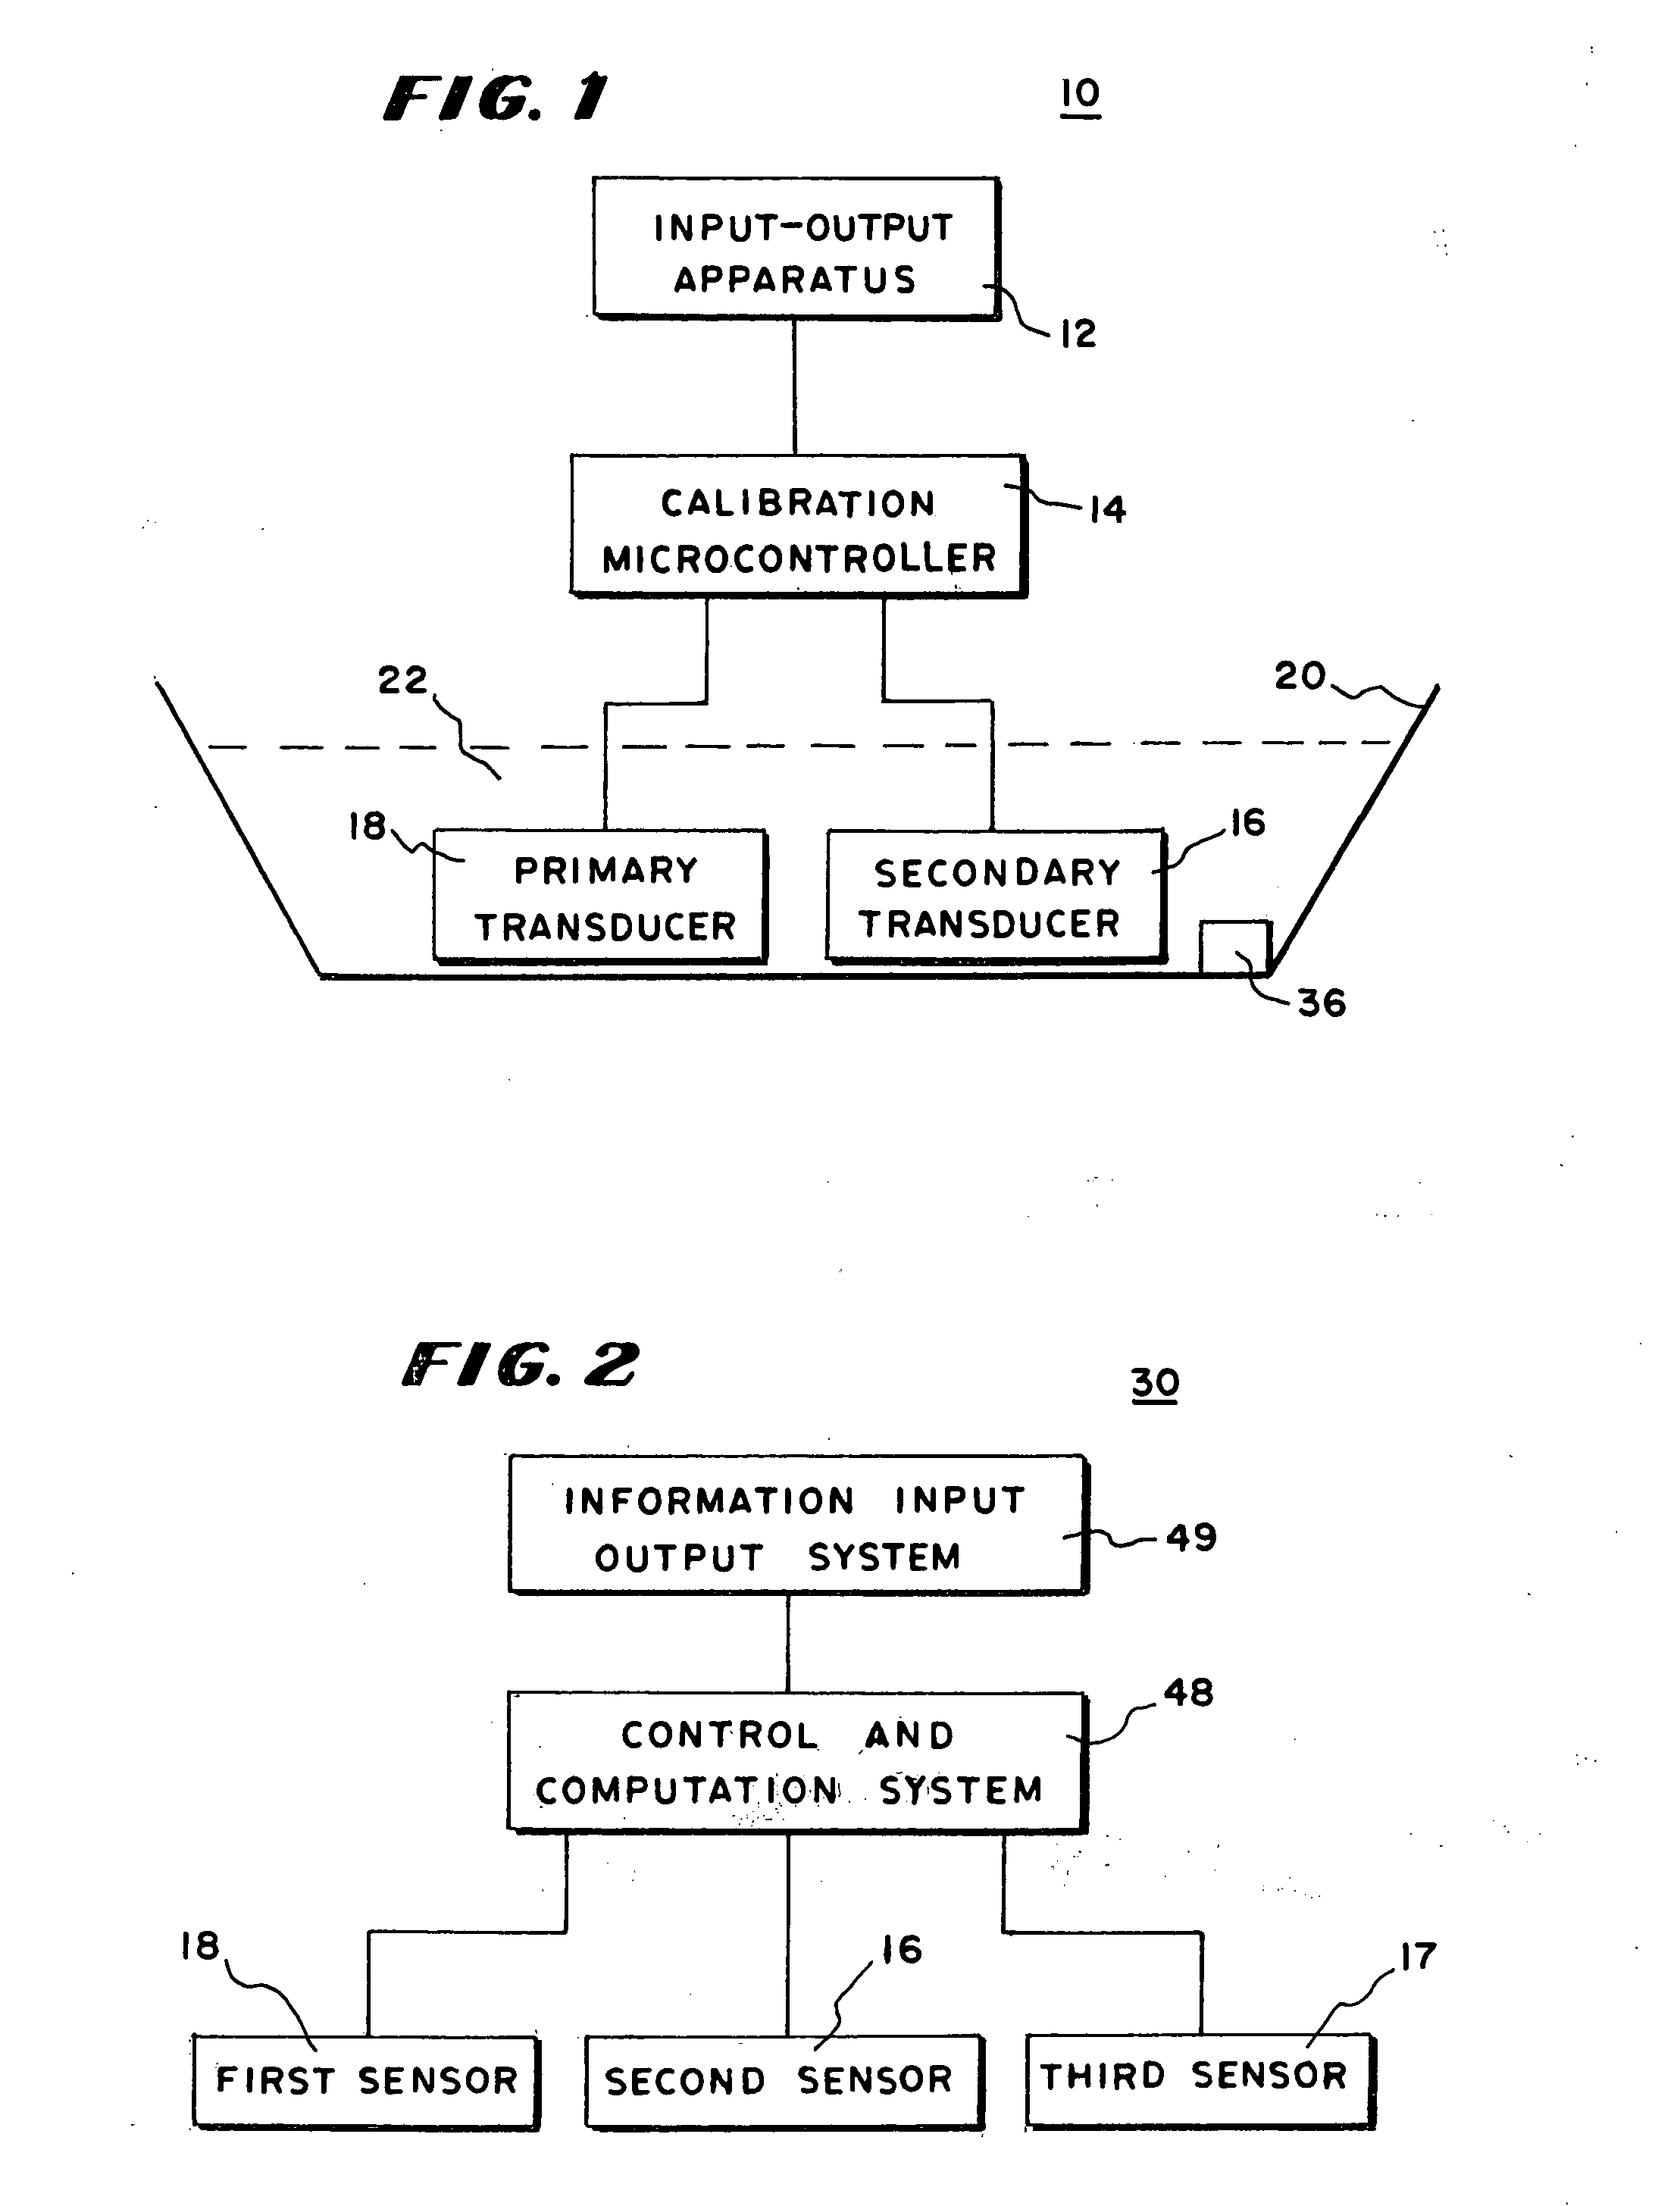 Measuring apparatuses and methods of using them